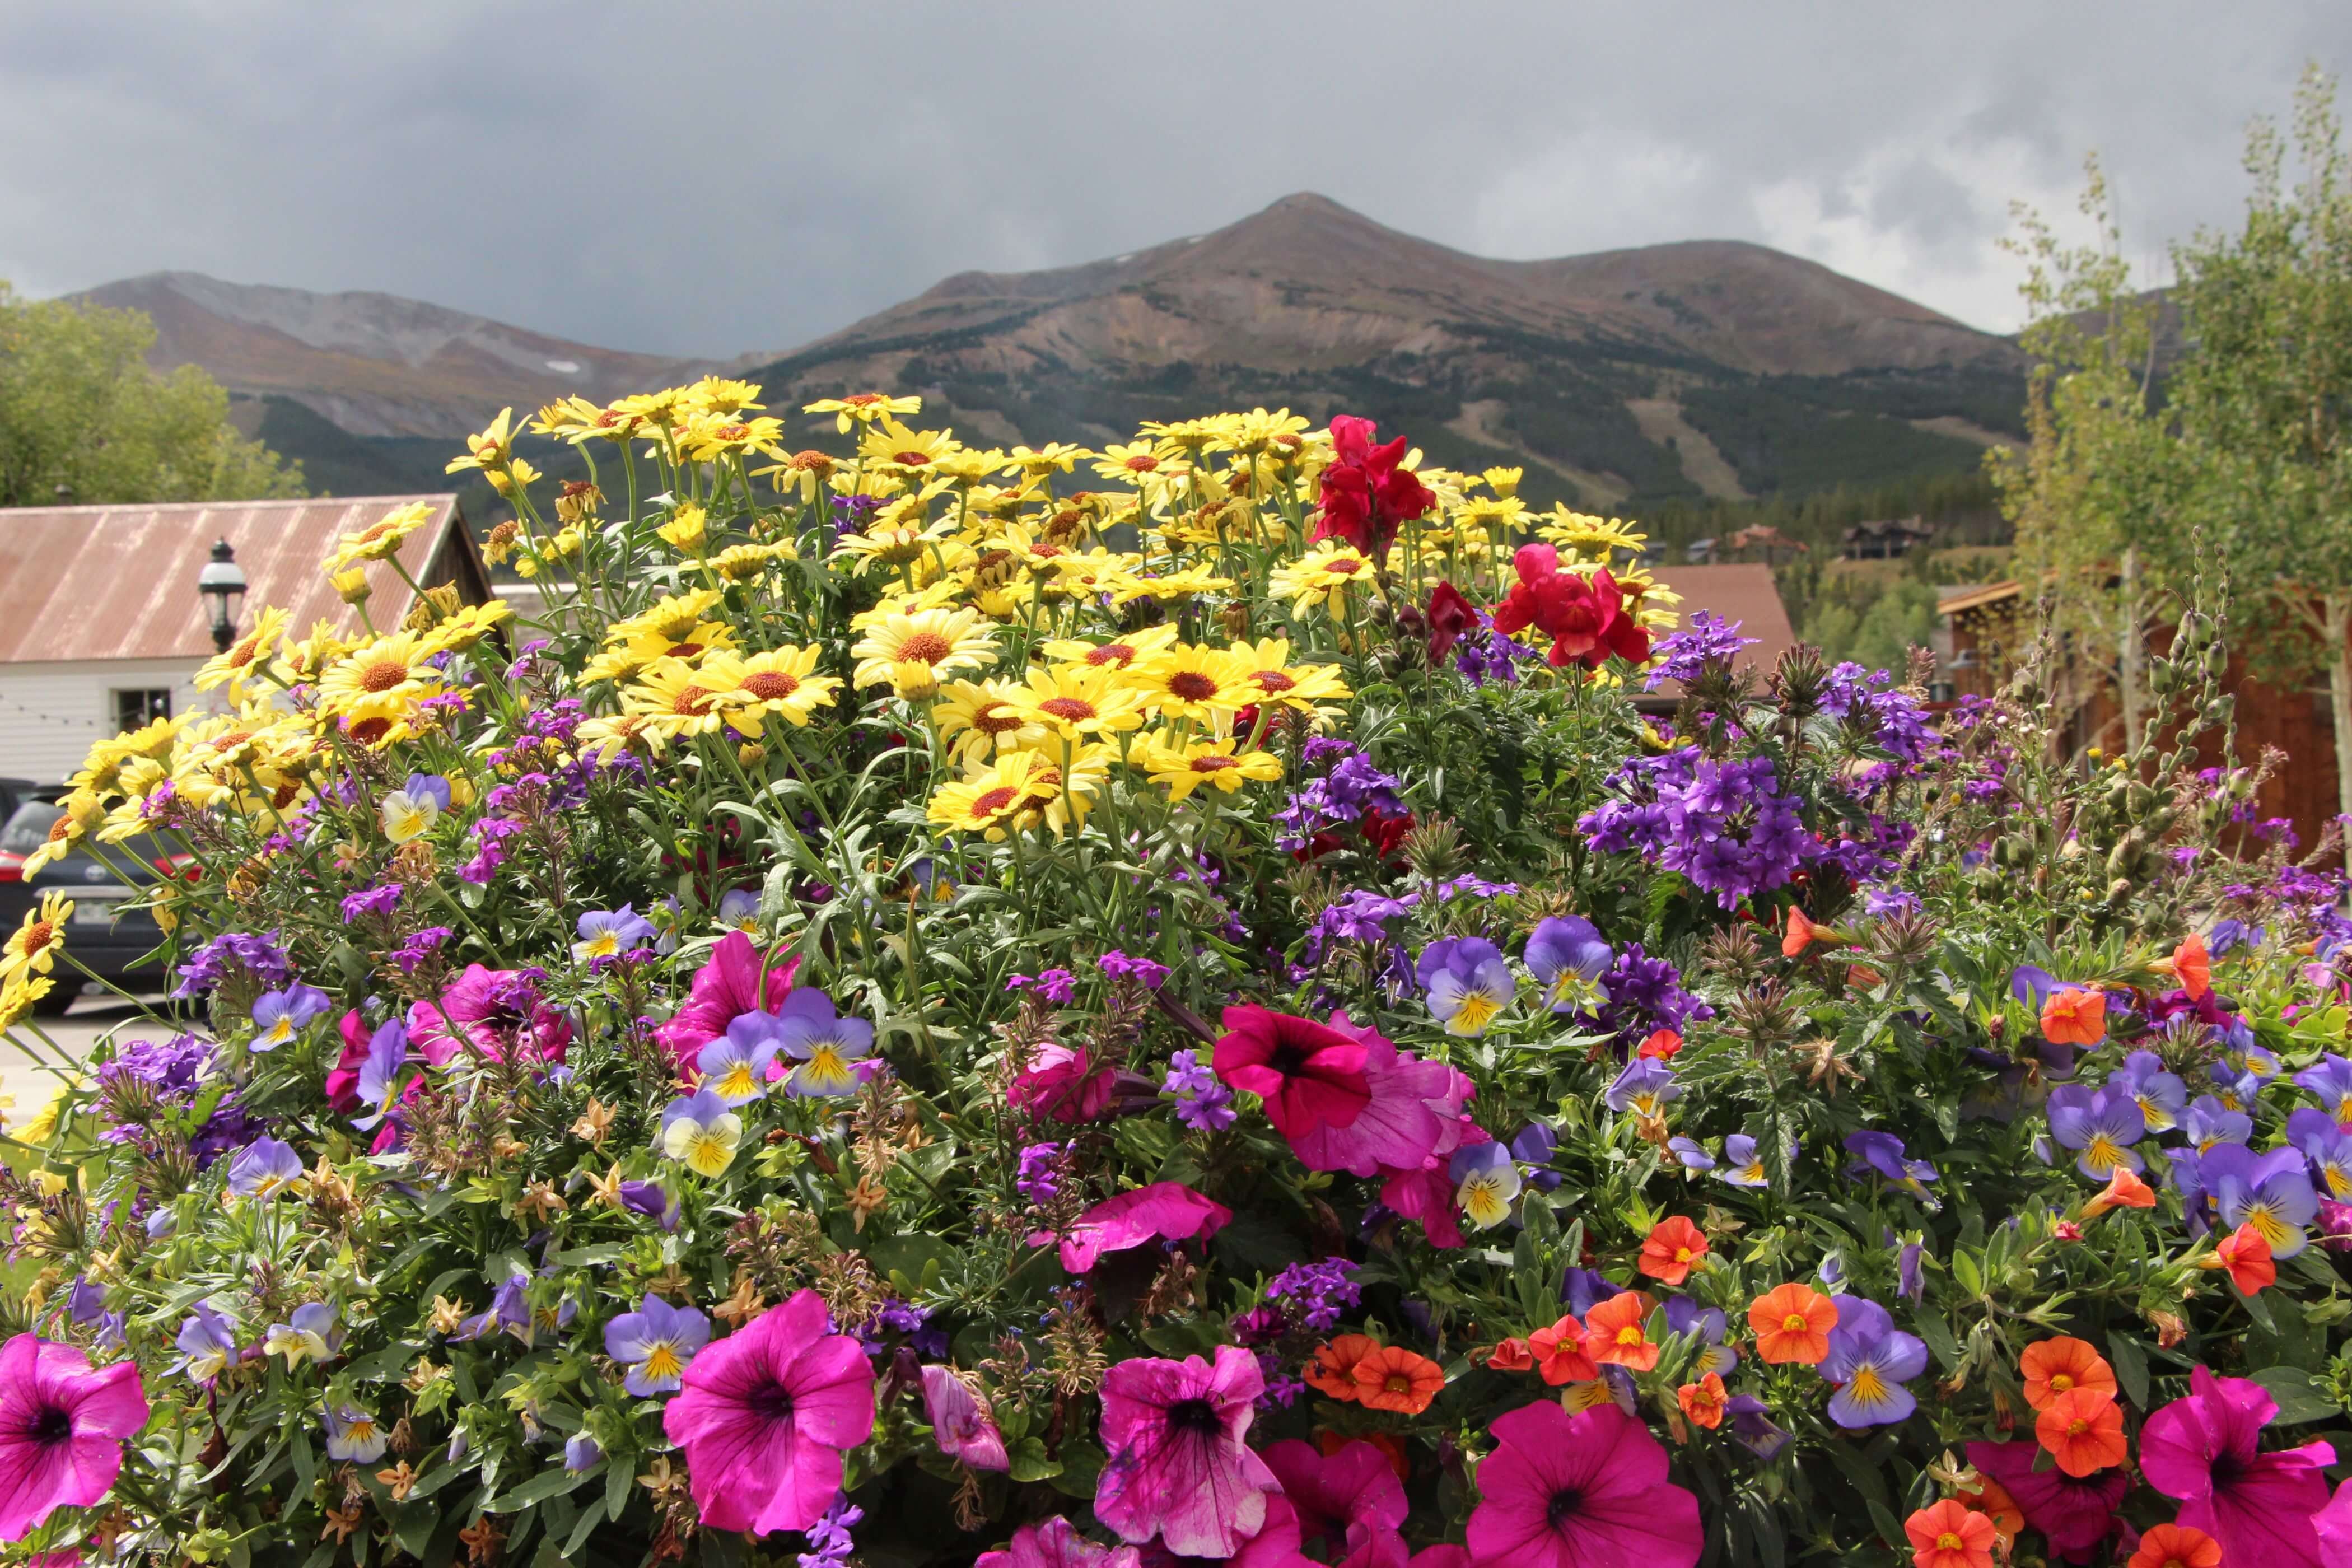 A flower basket in Breckenridge, Colorado. Mountains and summer storms in the background.